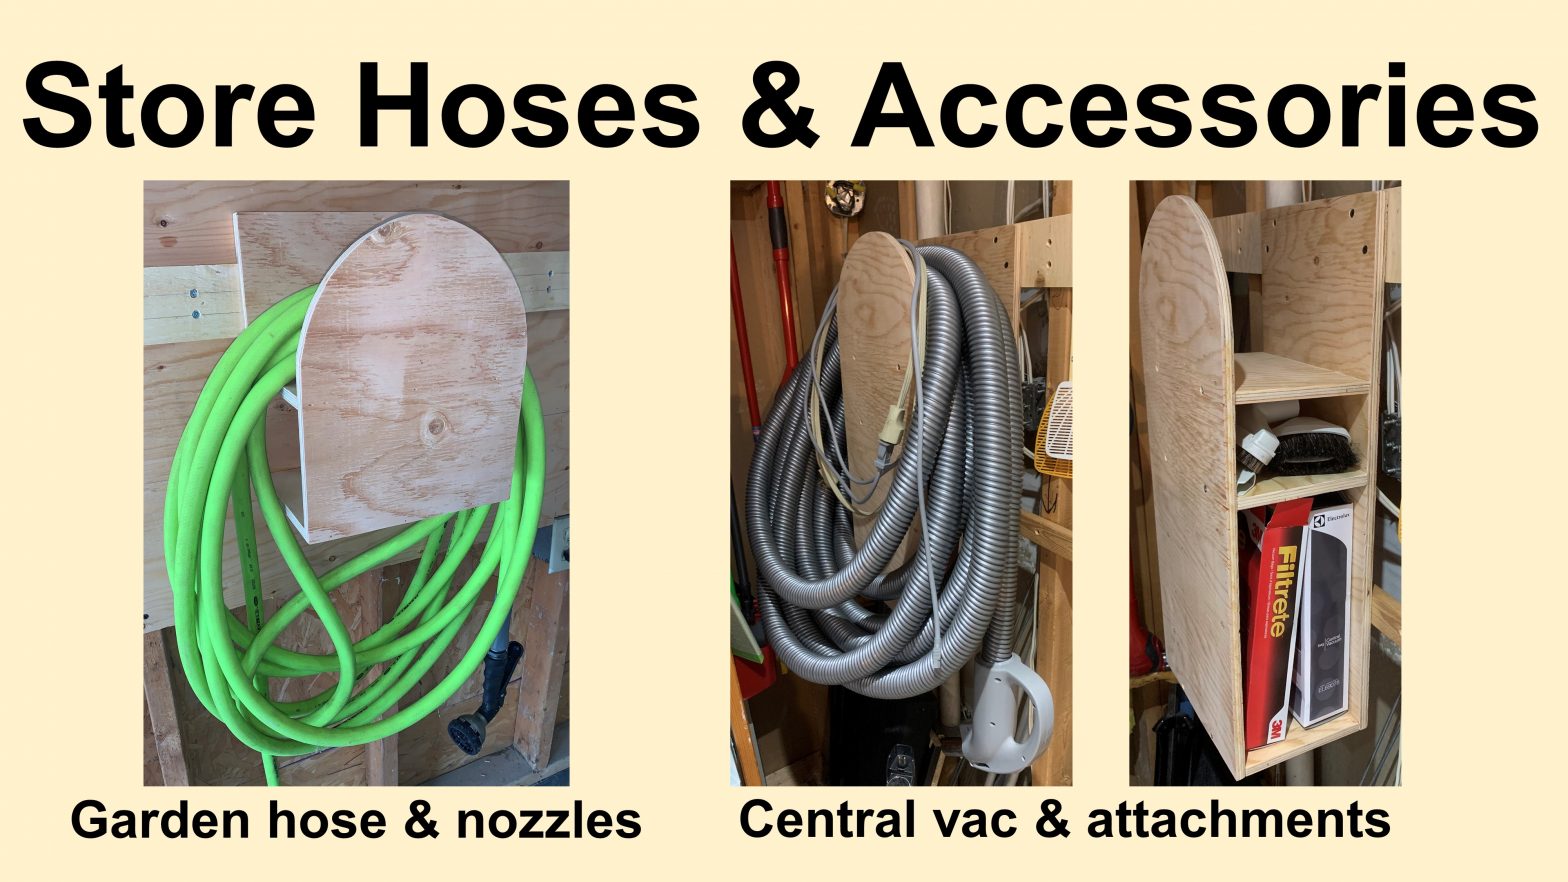 Hose Hanger with Storage – use on French cleat wall